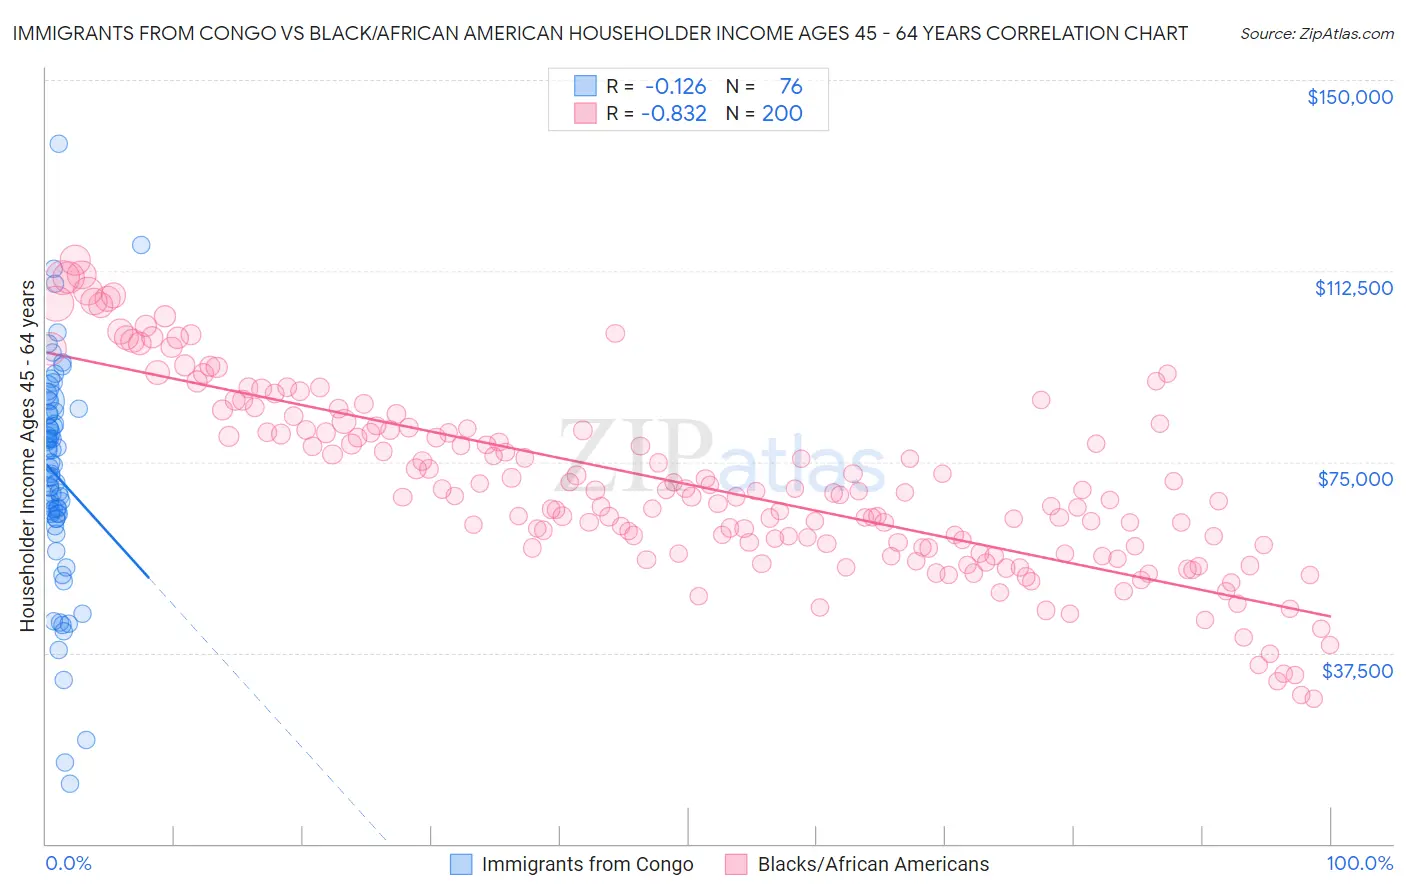 Immigrants from Congo vs Black/African American Householder Income Ages 45 - 64 years